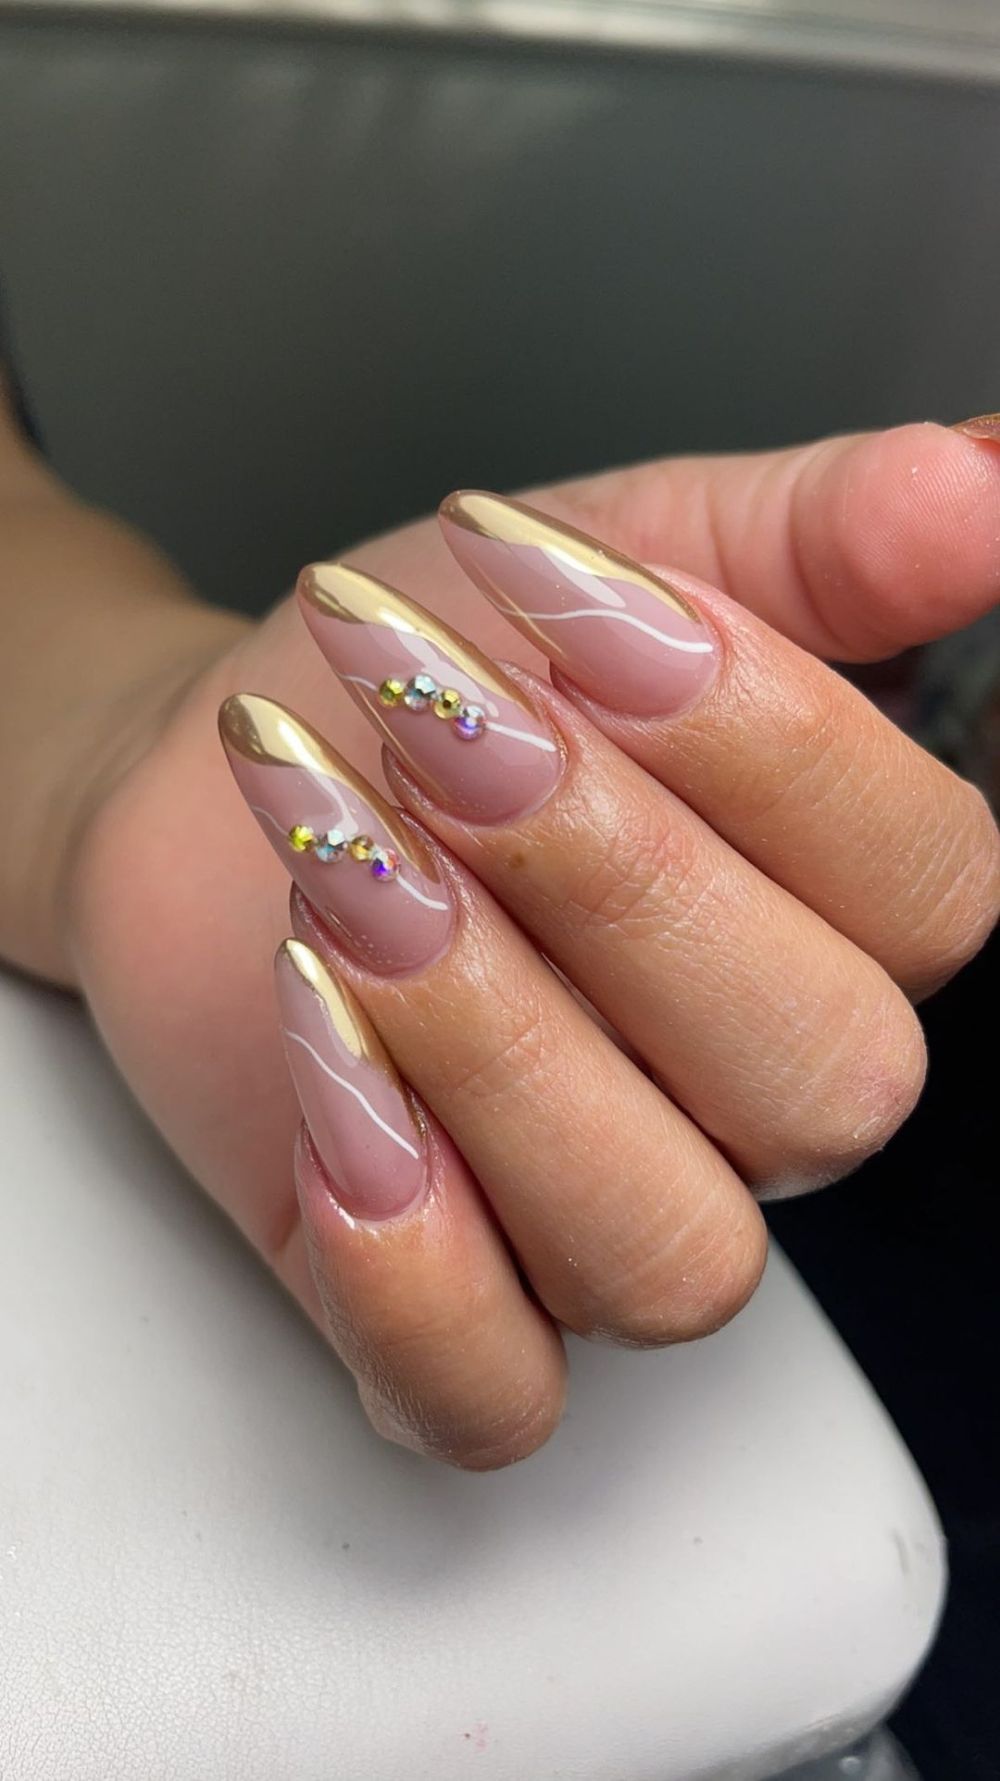 Golden year nails